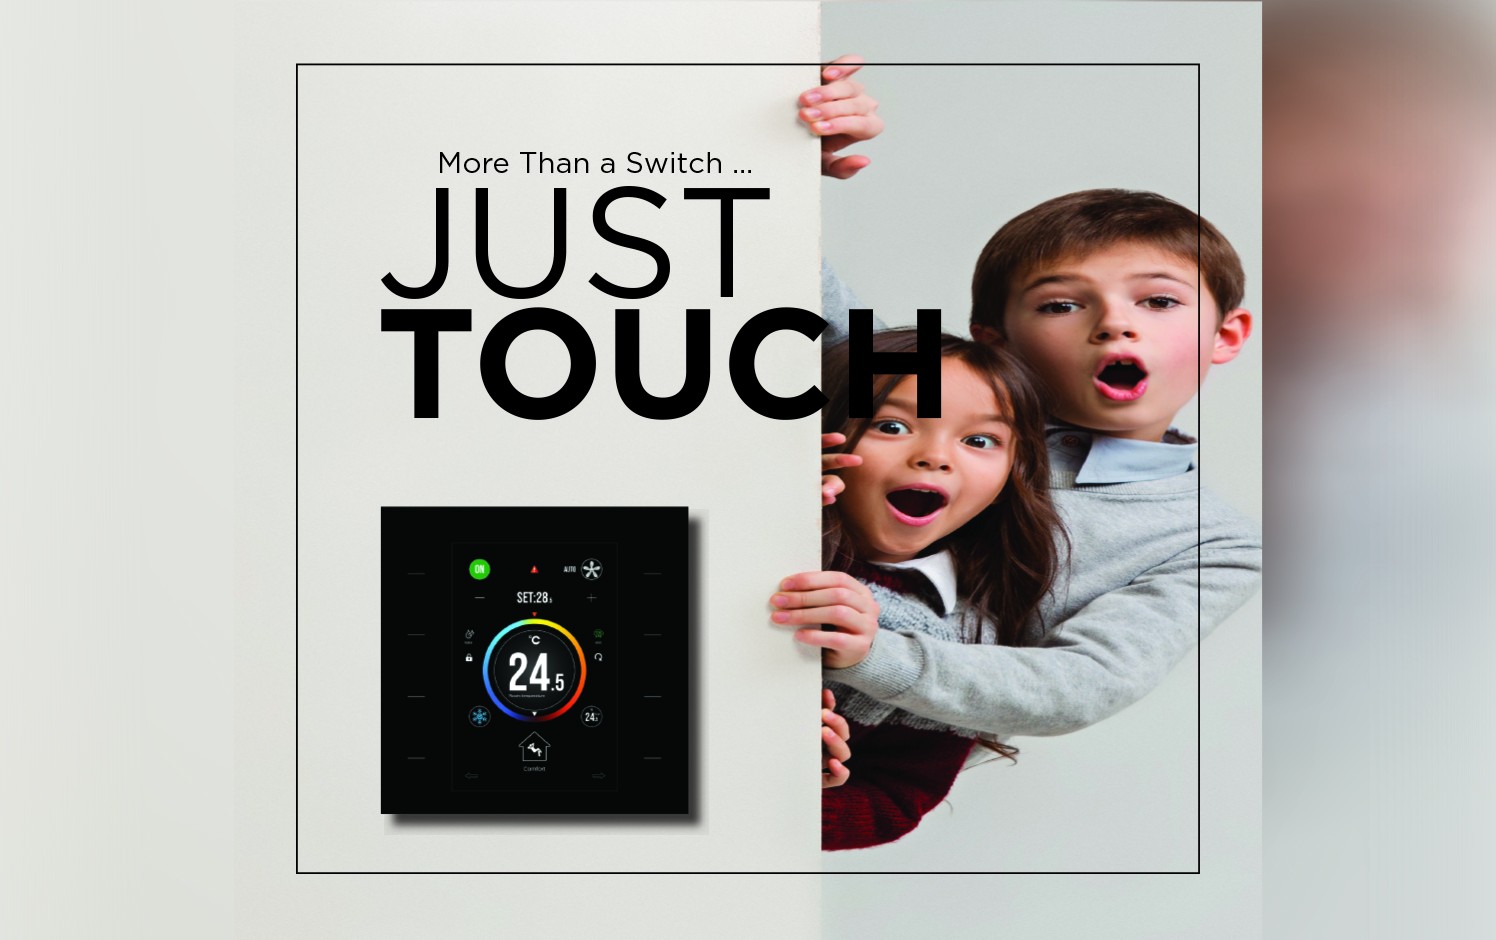 Just touch